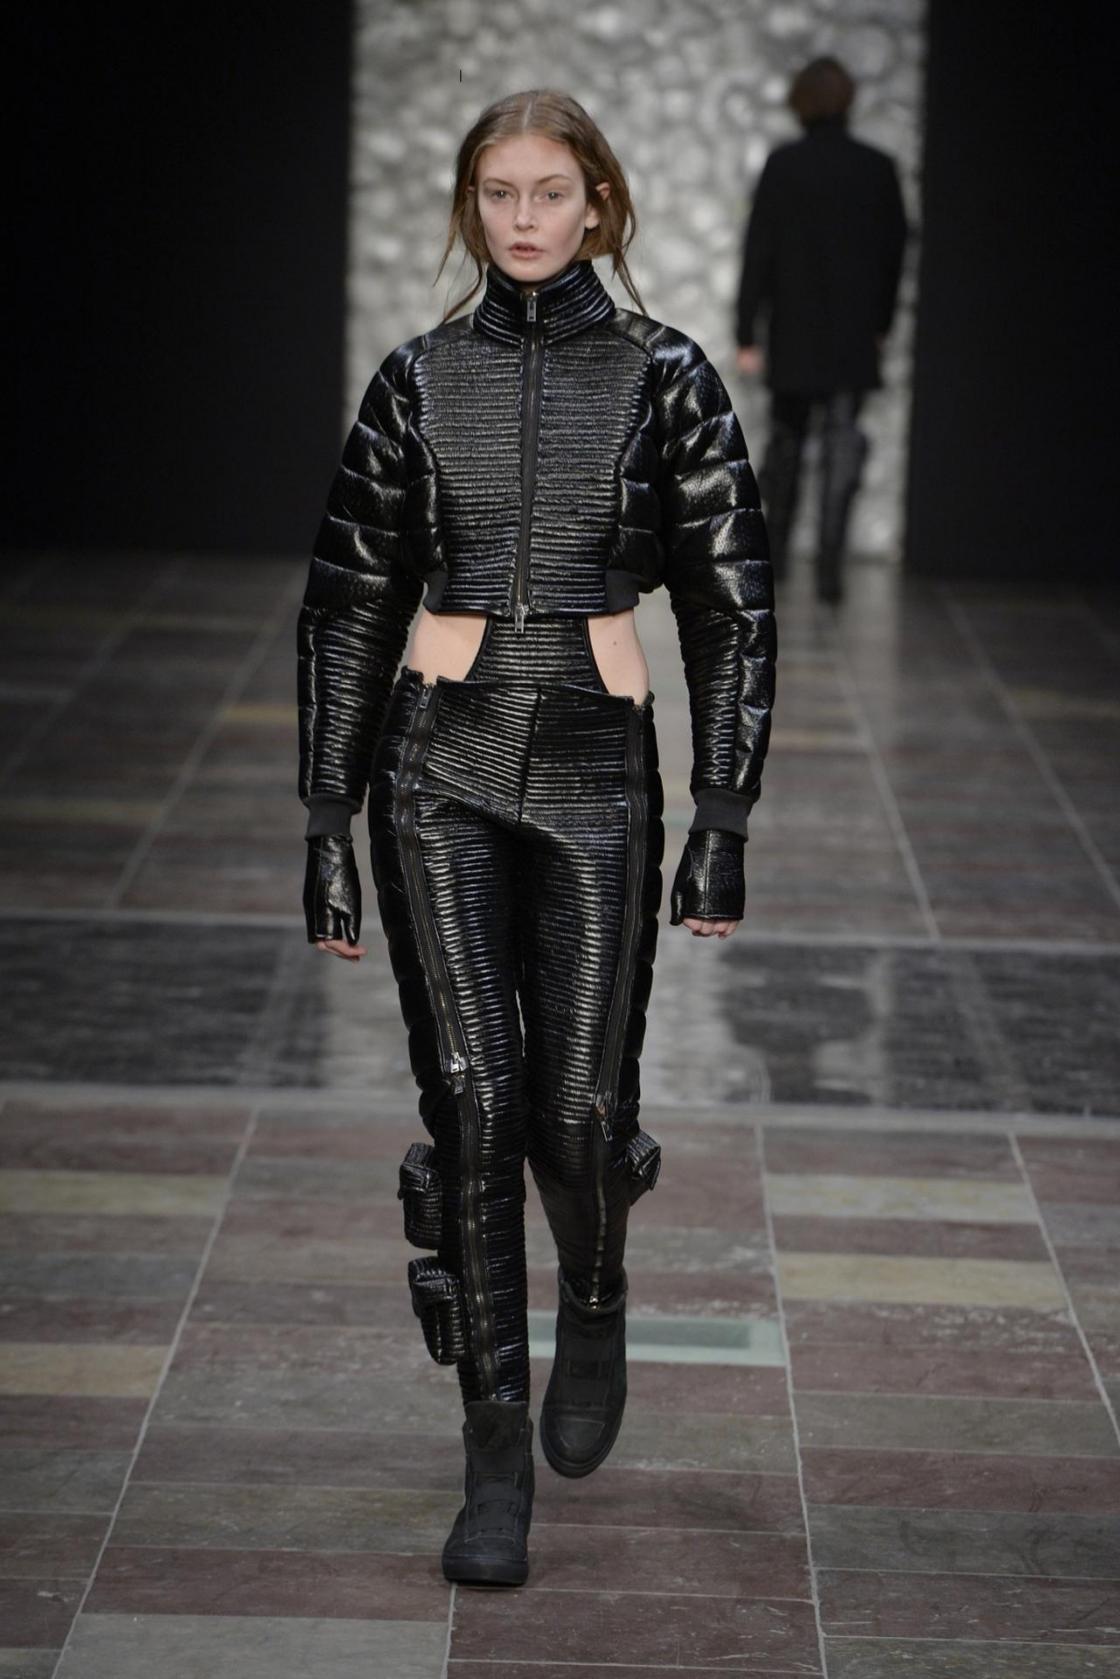 You are currently viewing Copenhagen Fashion Week: Asger Juel Larsen AW14